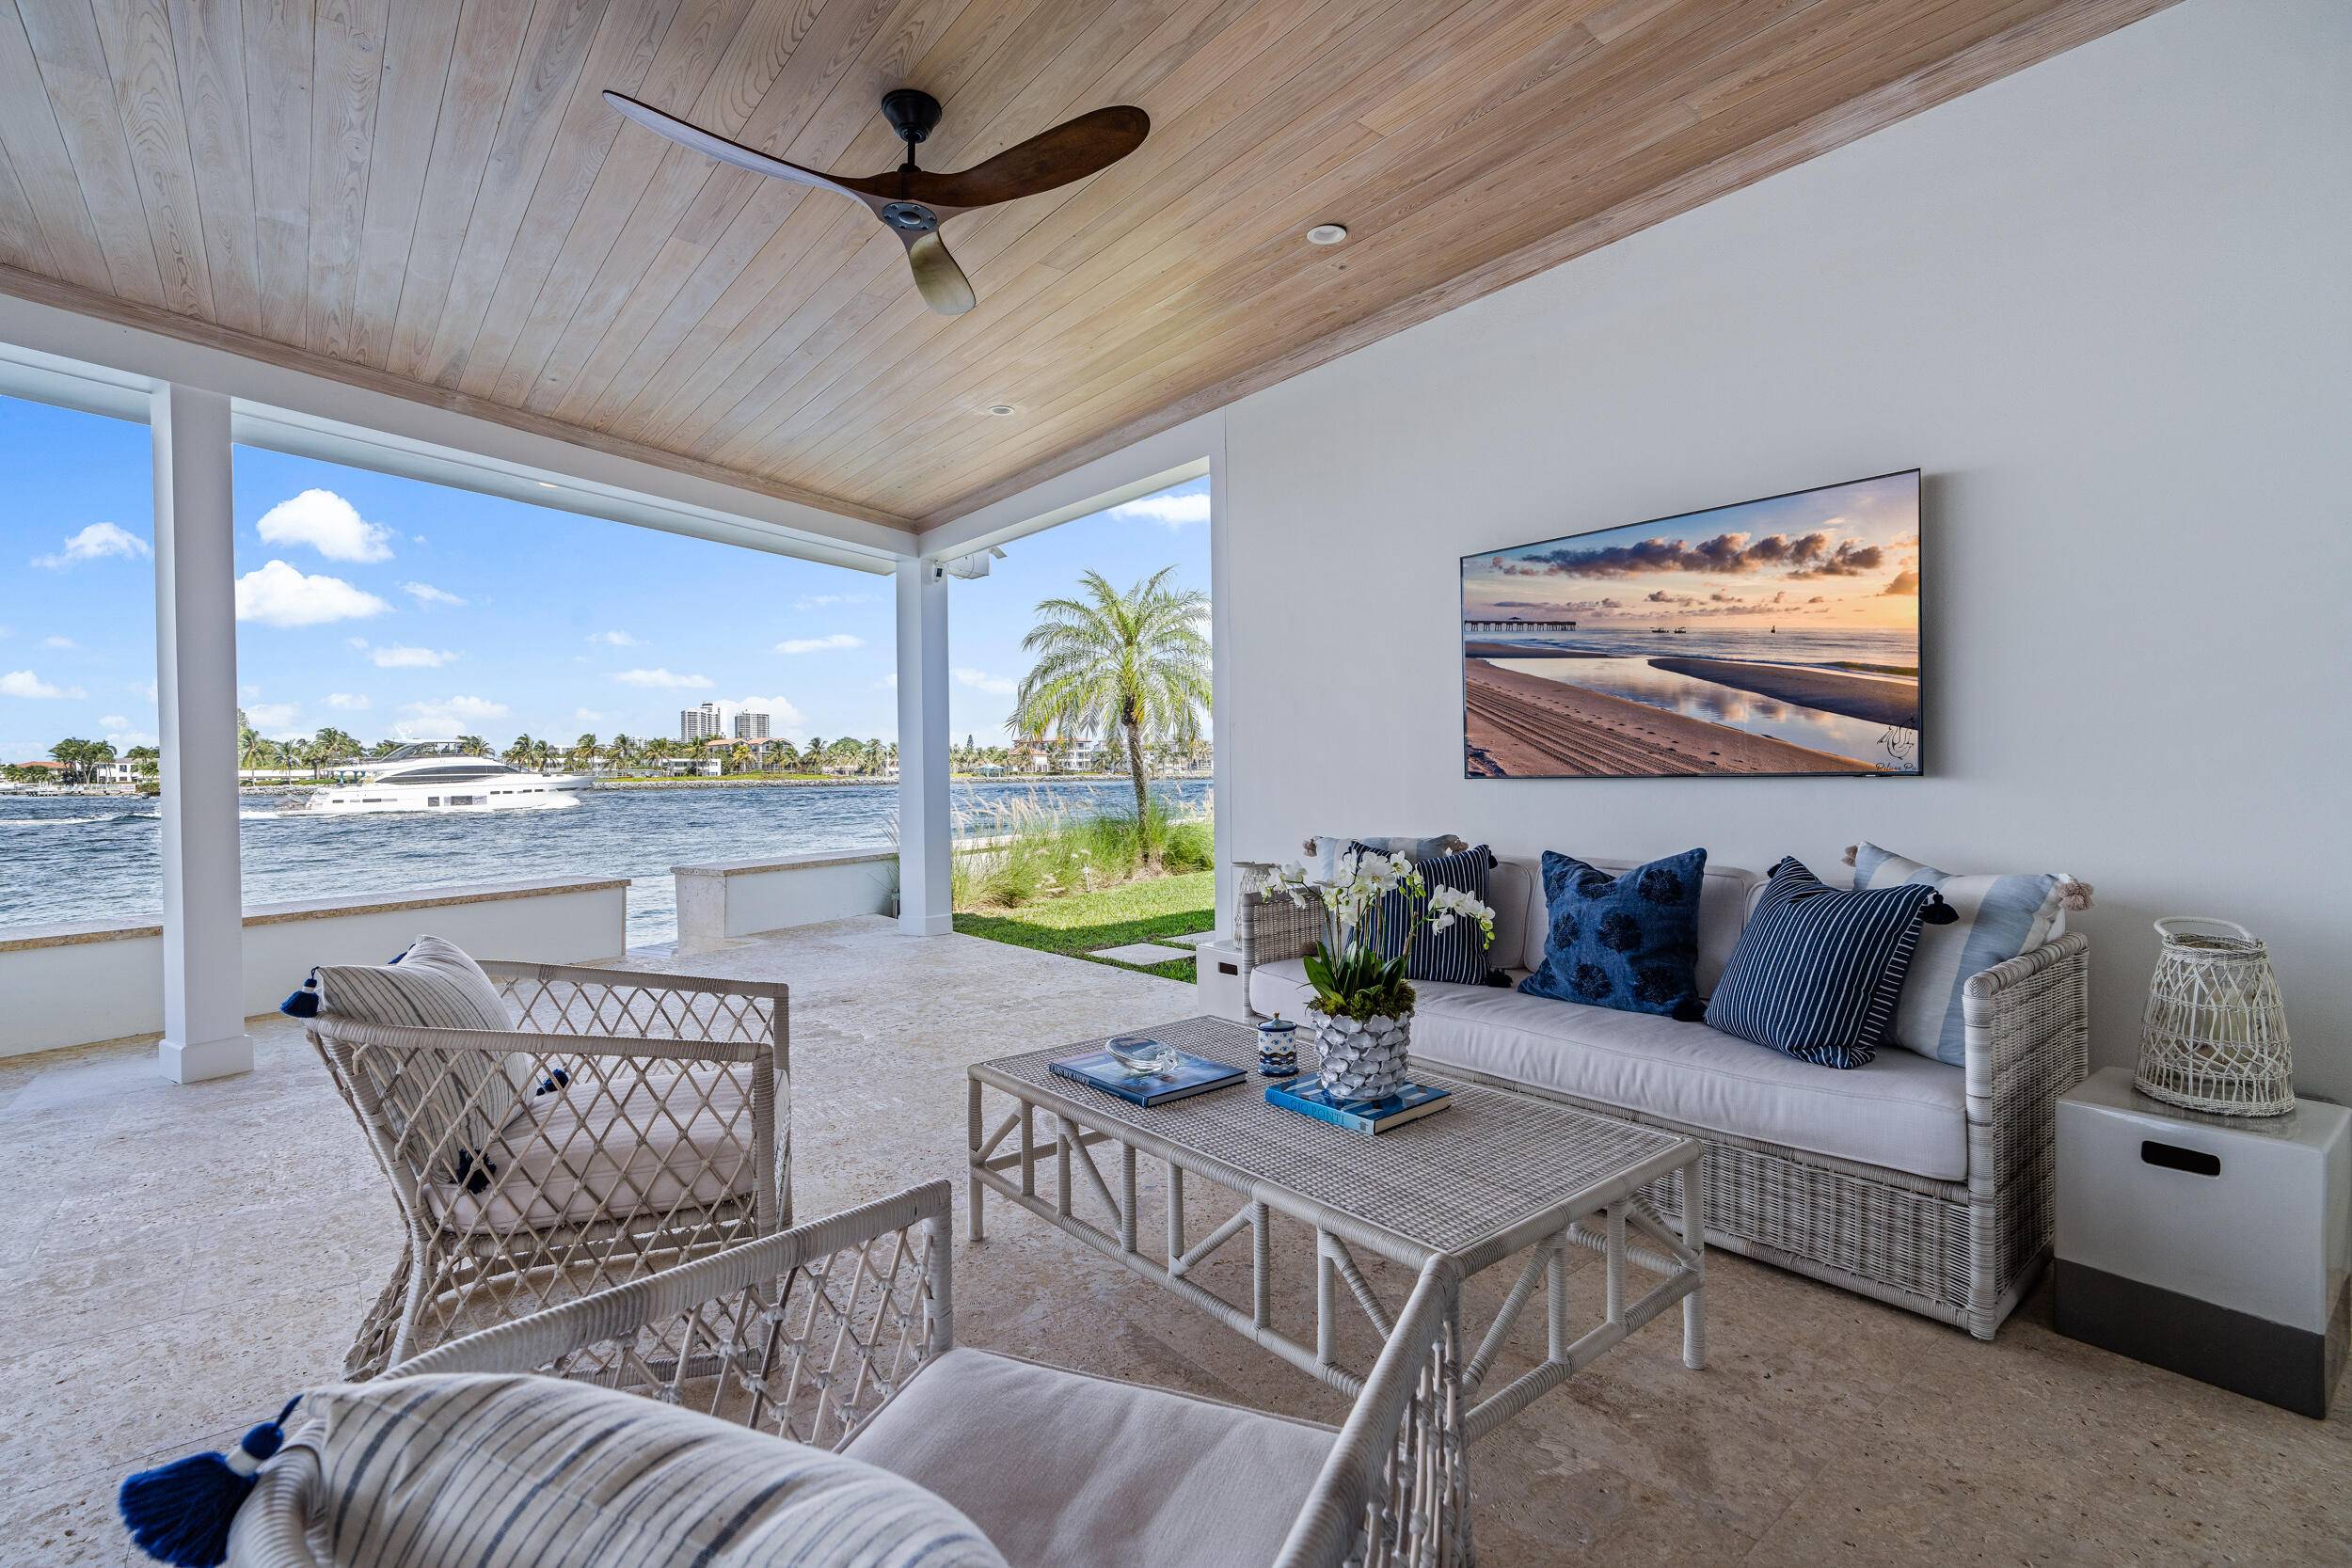 Exceptional direct intracoastal home nestled along Palm Beach's mesmerizing turquoise inlet waters.